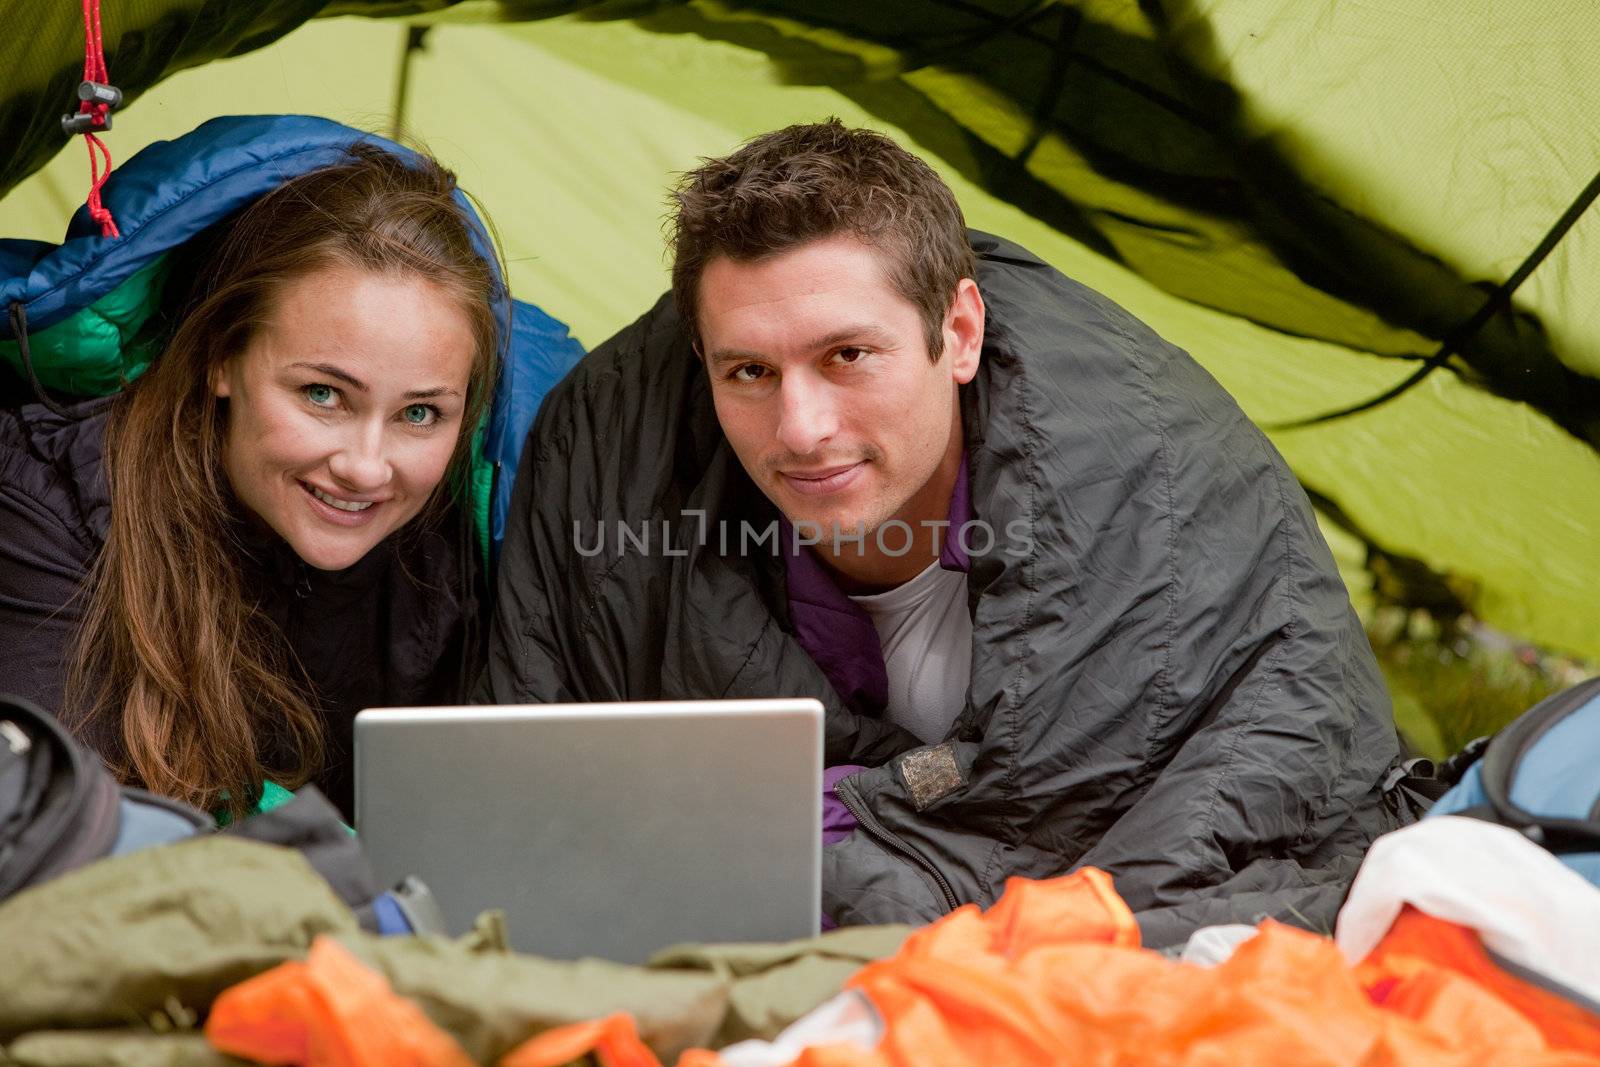 Camping with Computer by leaf